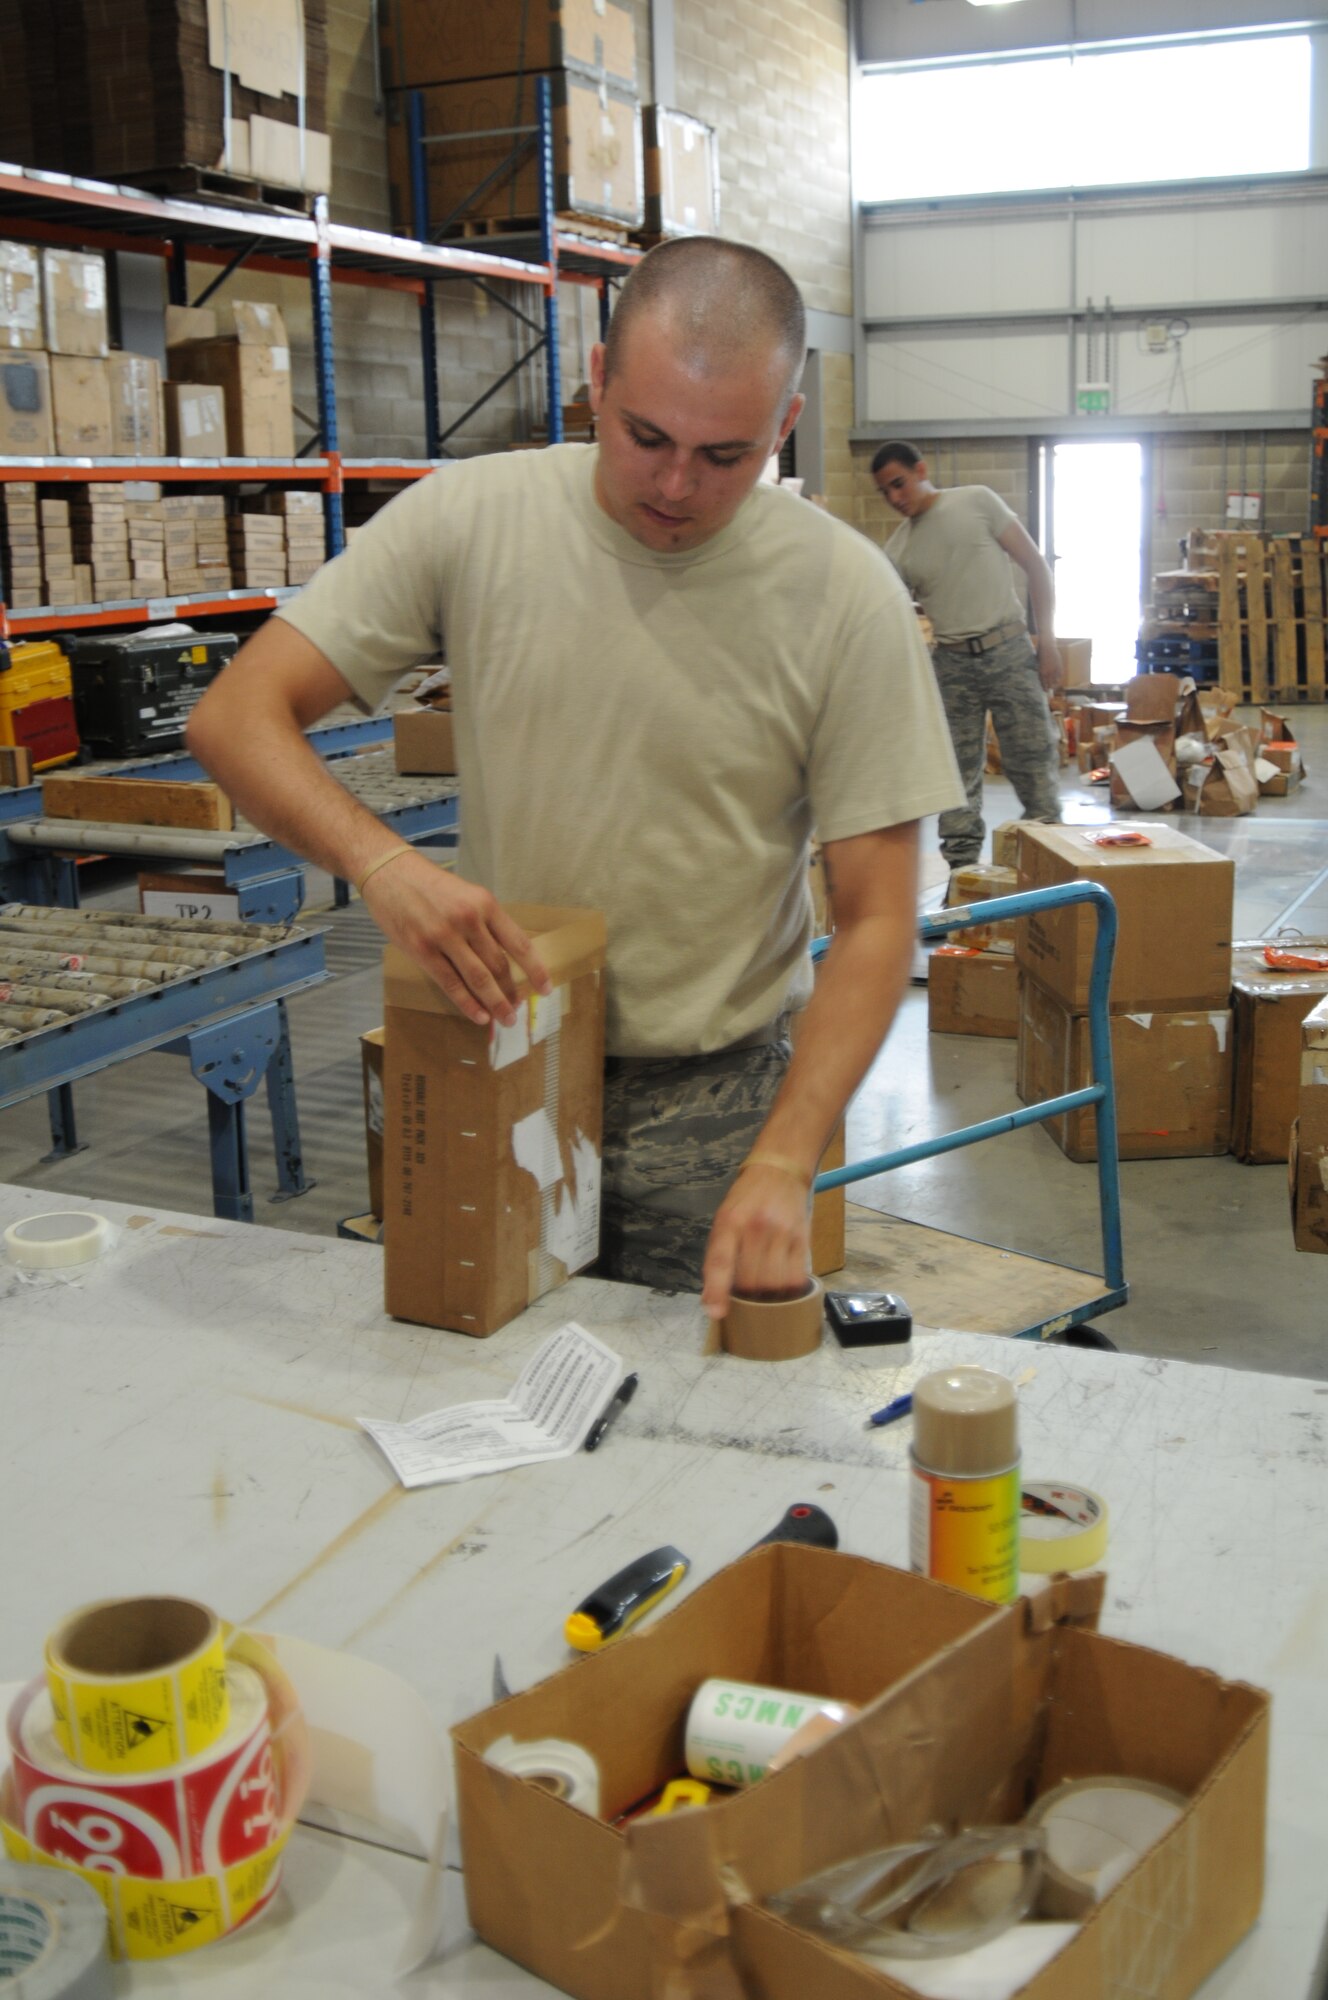 Senior Airman Robert Lee, 45th Logistics Readiness Squadron traffic management journeyman, prepares a package for shipment in the TMO warehouse July 19. TMO processes 150-200 separate items daily. (U.S. Air Force photo/Senior Airman David Dobrydney)